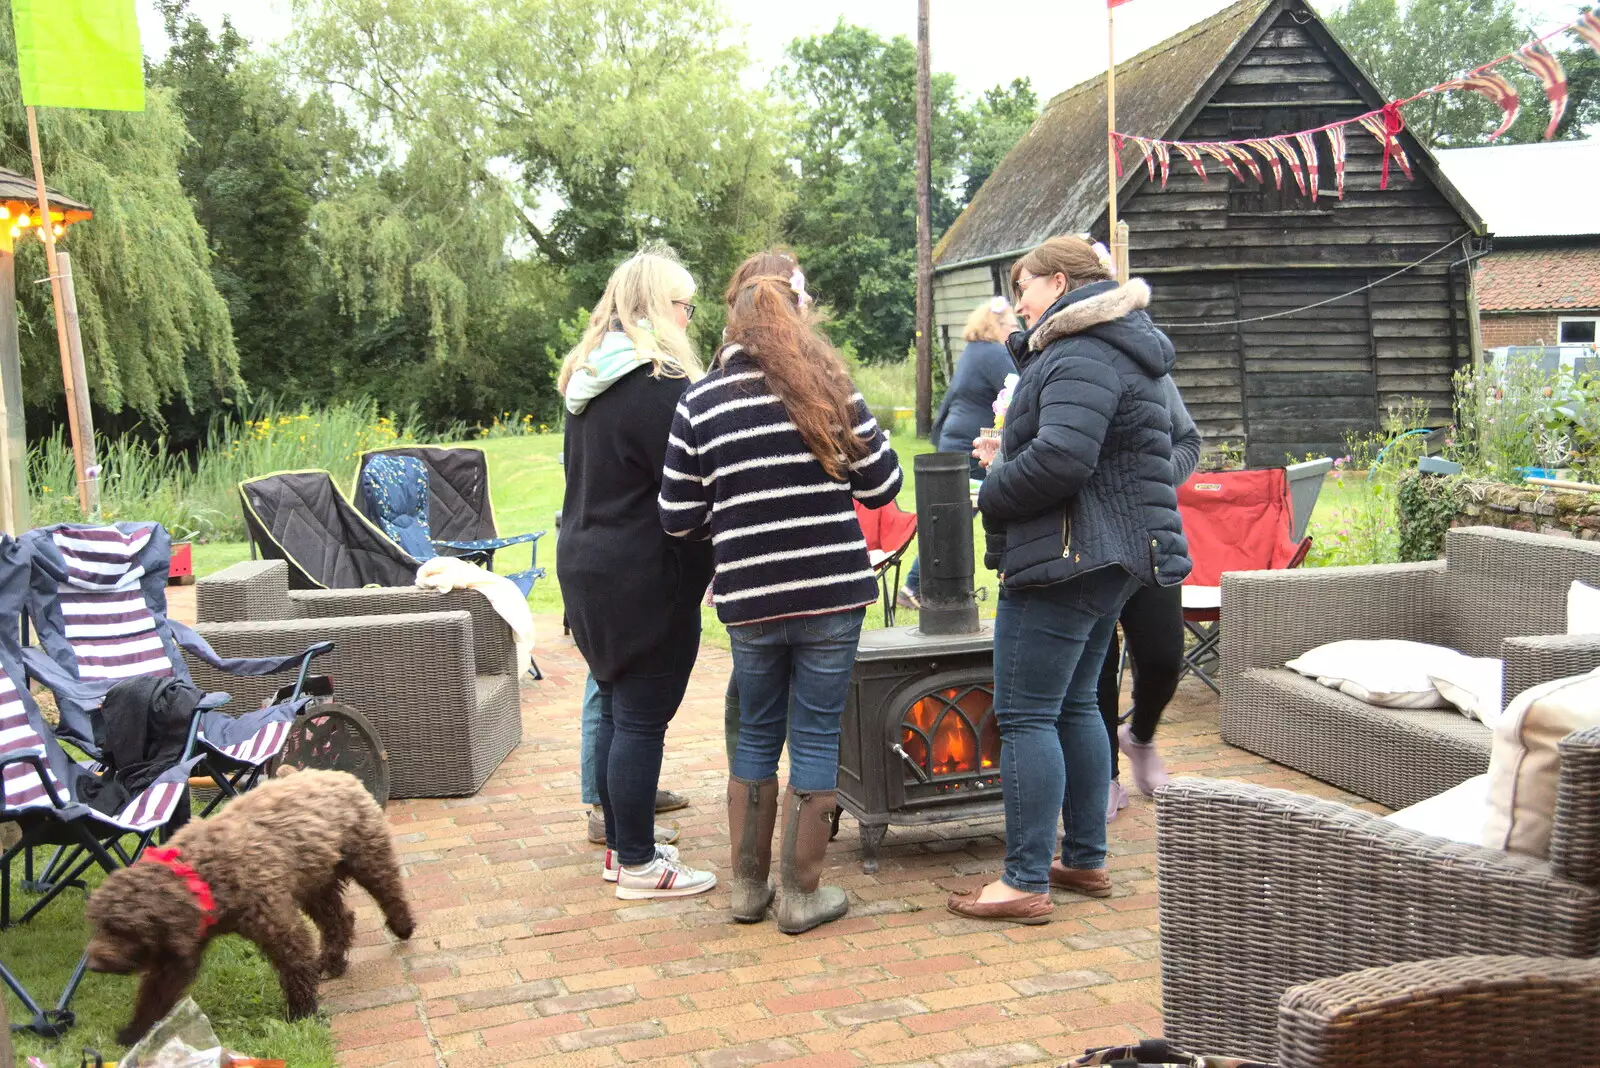 Gathering around the outdoor wood burner, from Suze-fest, Braisworth, Suffolk - 19th June 2021